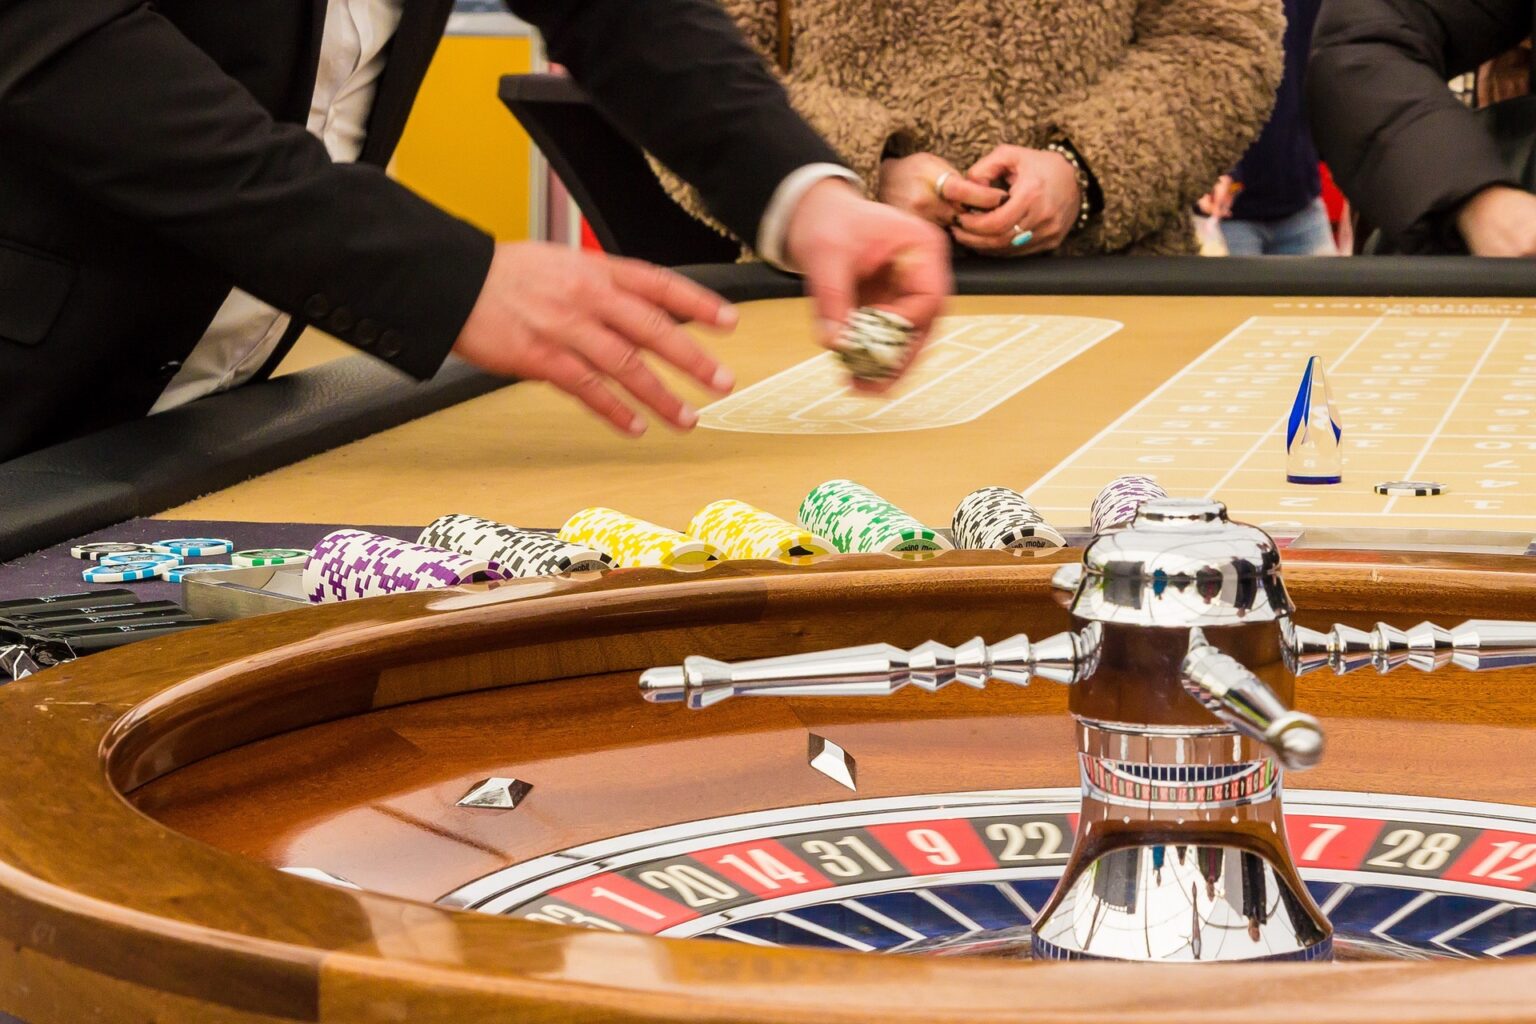 As one of the most dramatic casino games, roulette has unsurprisingly featured in many captivating movie scenes, click here to find out our top 5!